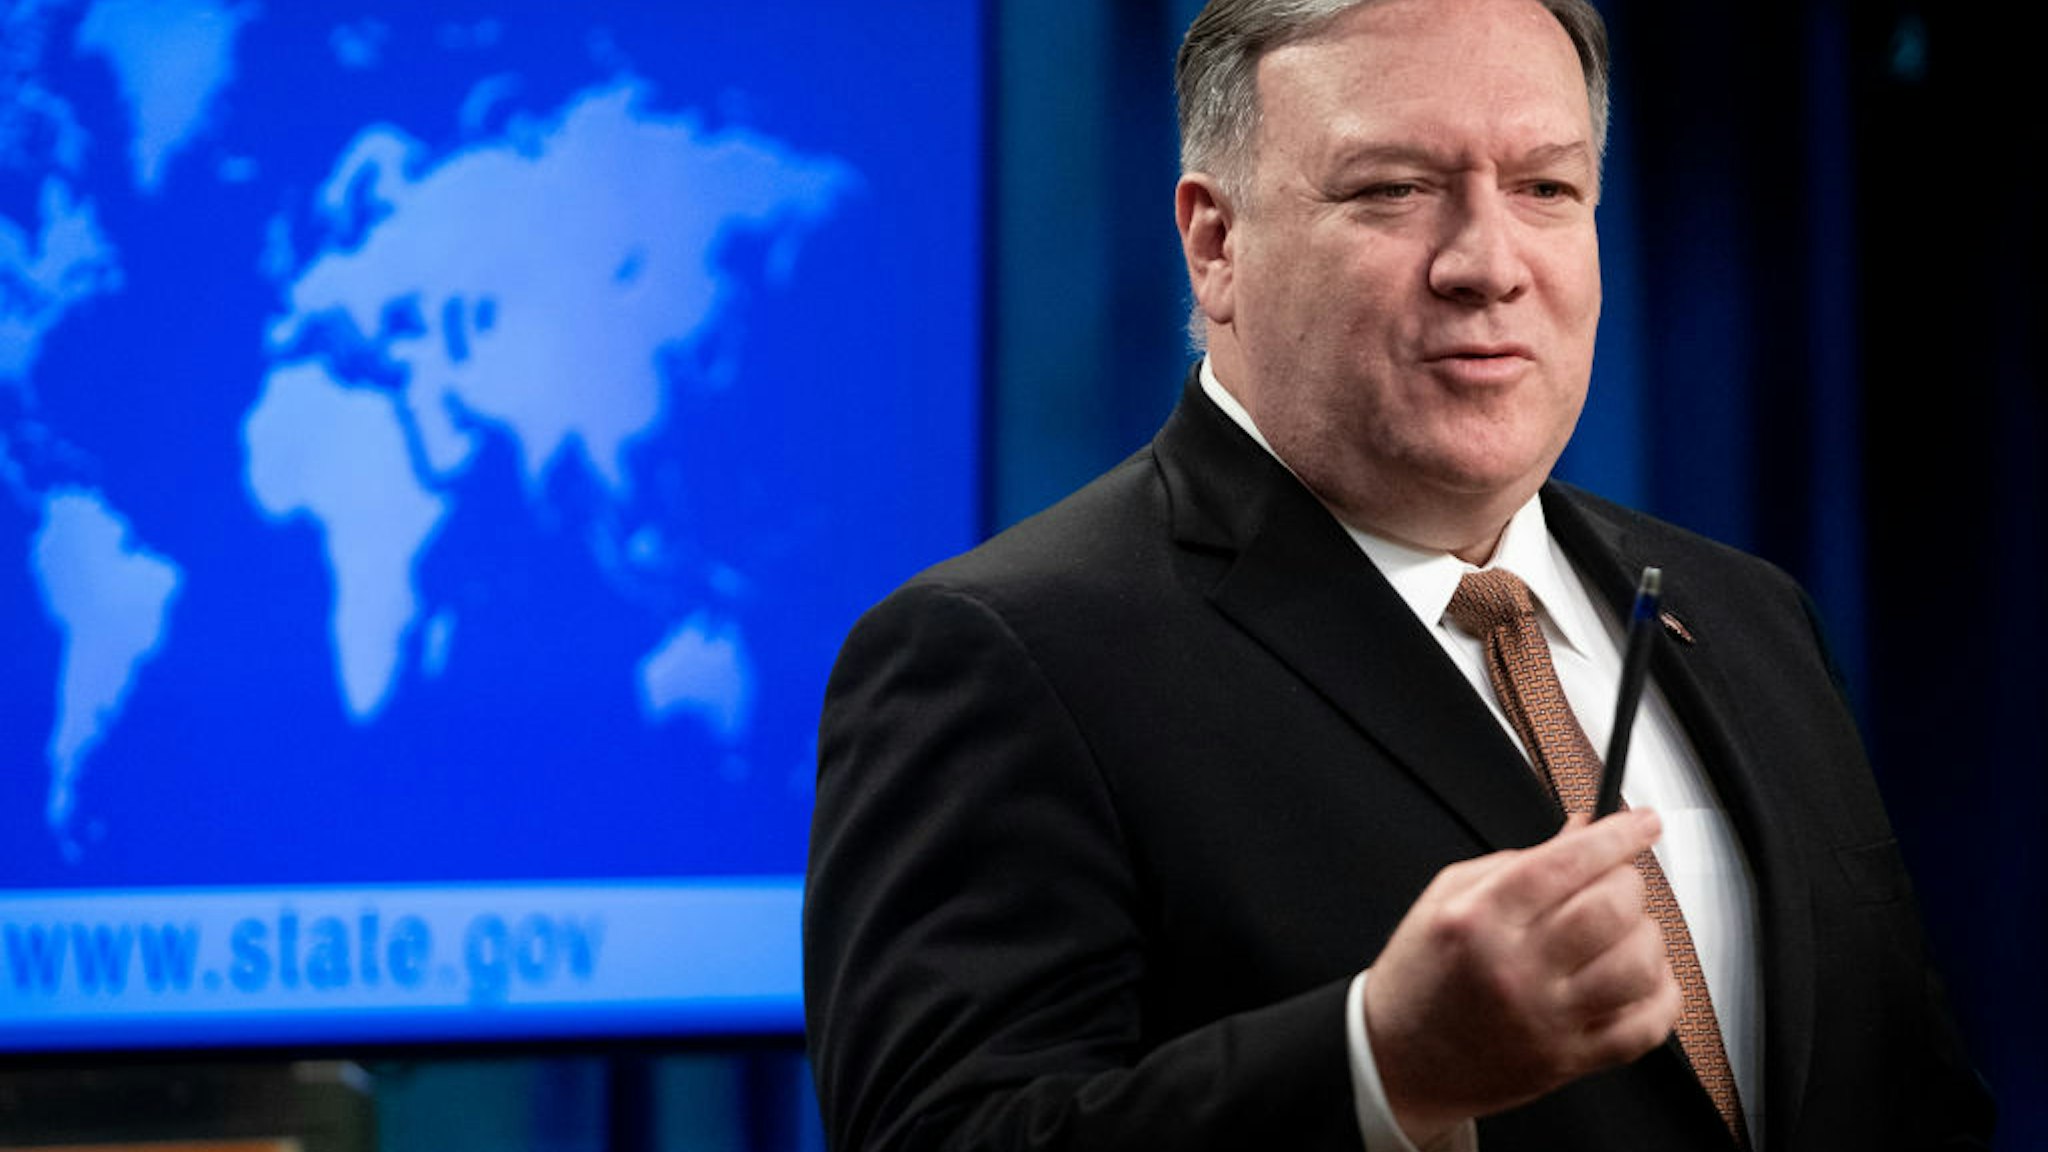 US Secretary of State Mike Pompeo announces that the US will designate Iran's Islamic Revolutionary Guard Corps (IRGC) as a Foreign Terrorist Organization (FTO) during a press conference at the State Department in Washington, DC, April 8, 2019.